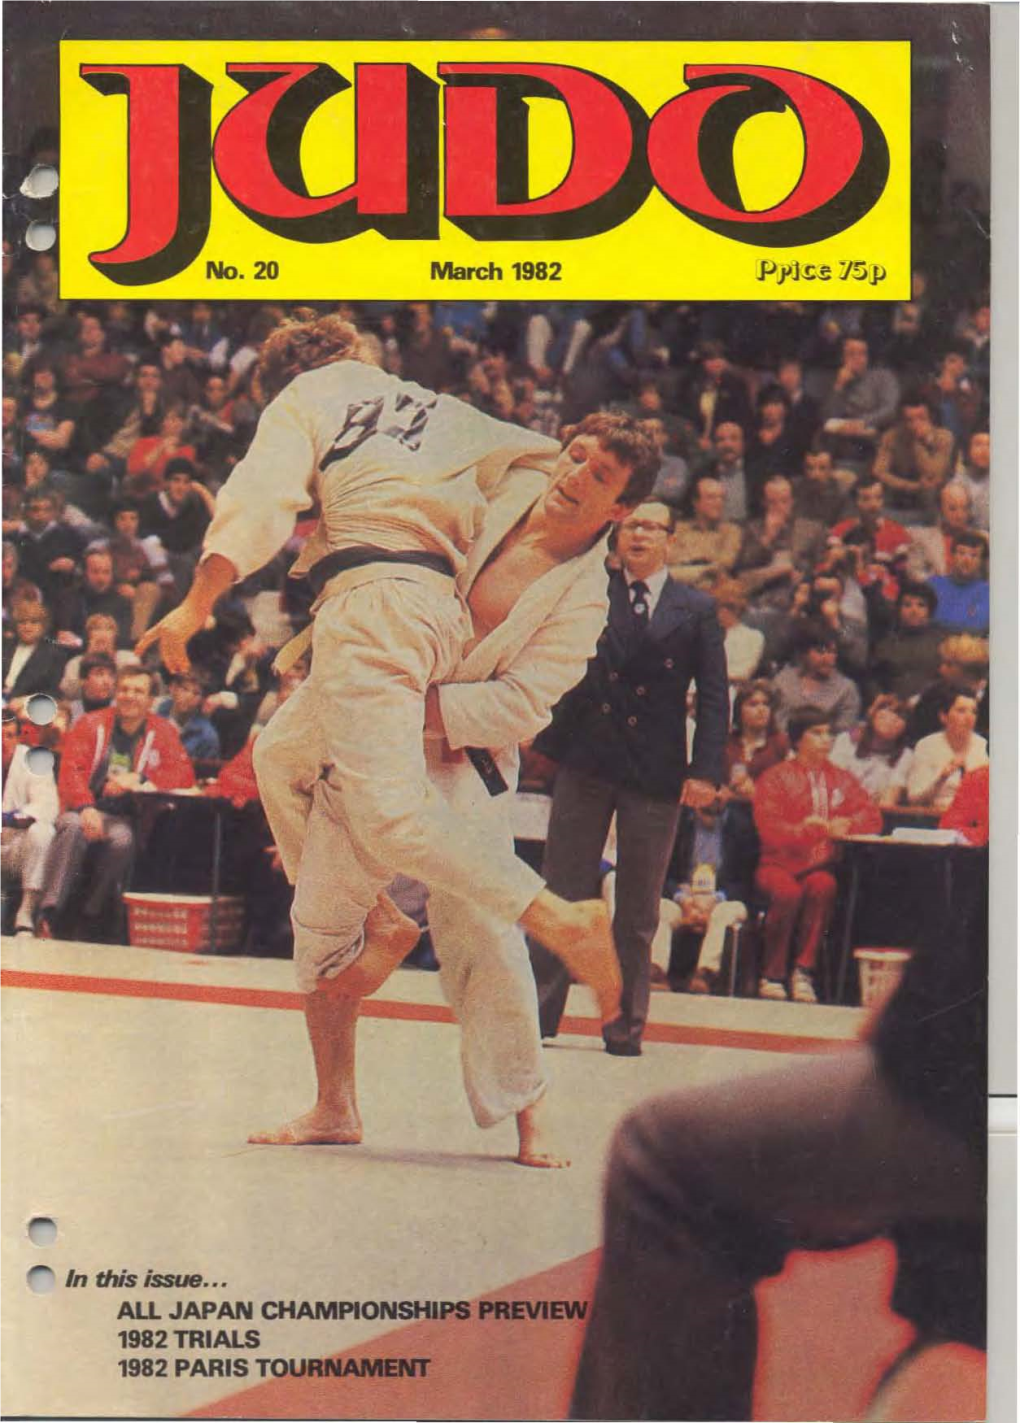 1982 TRIALS 1982 PARIST , ' ~'- ~-.- JUDO,OLYMPIC and JUDO,GREEN,BROWN ~:--- Rucanor NIPPON SUITS and BLACK LABEL SUITS